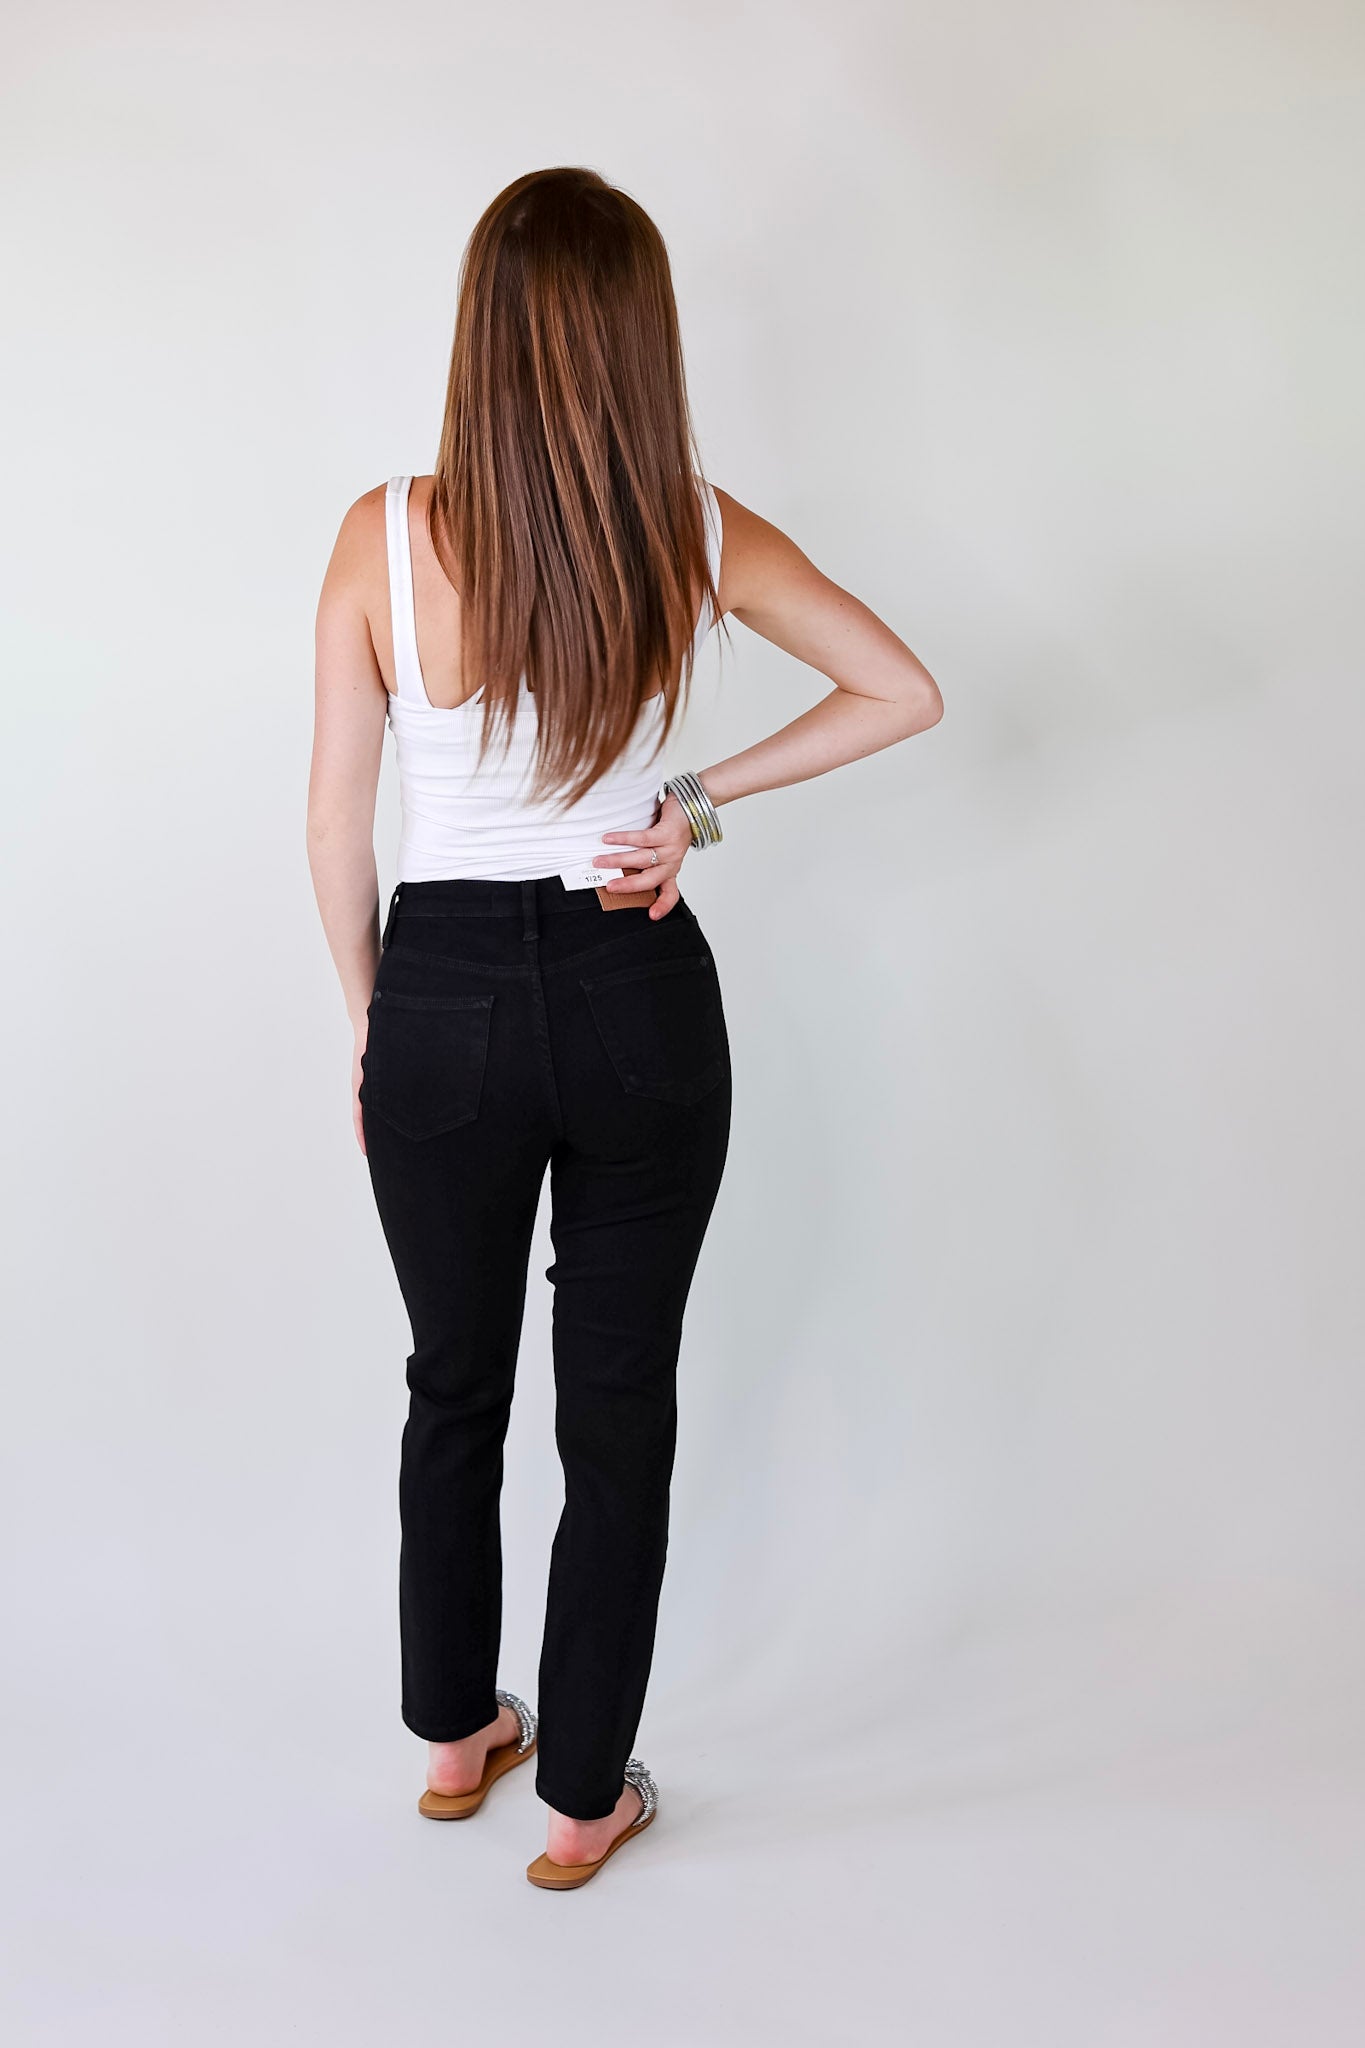 Judy Blue | Main Memories Slim Fit Jeans in Black - Giddy Up Glamour Boutique